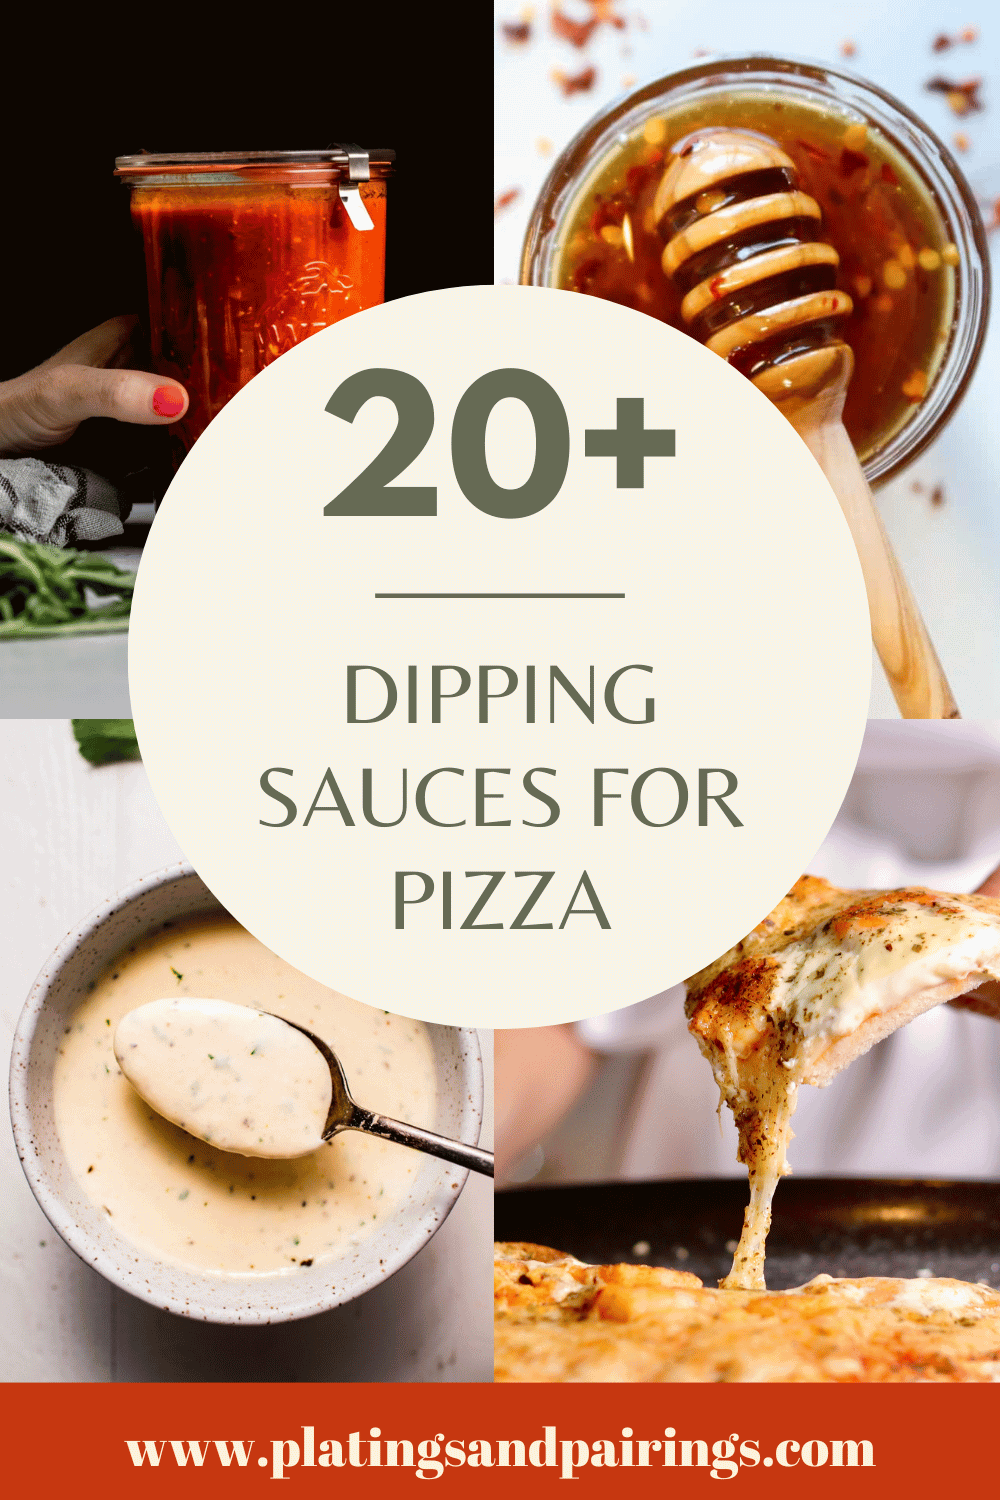 Collage of dipping sauces for pizza with text overlay.